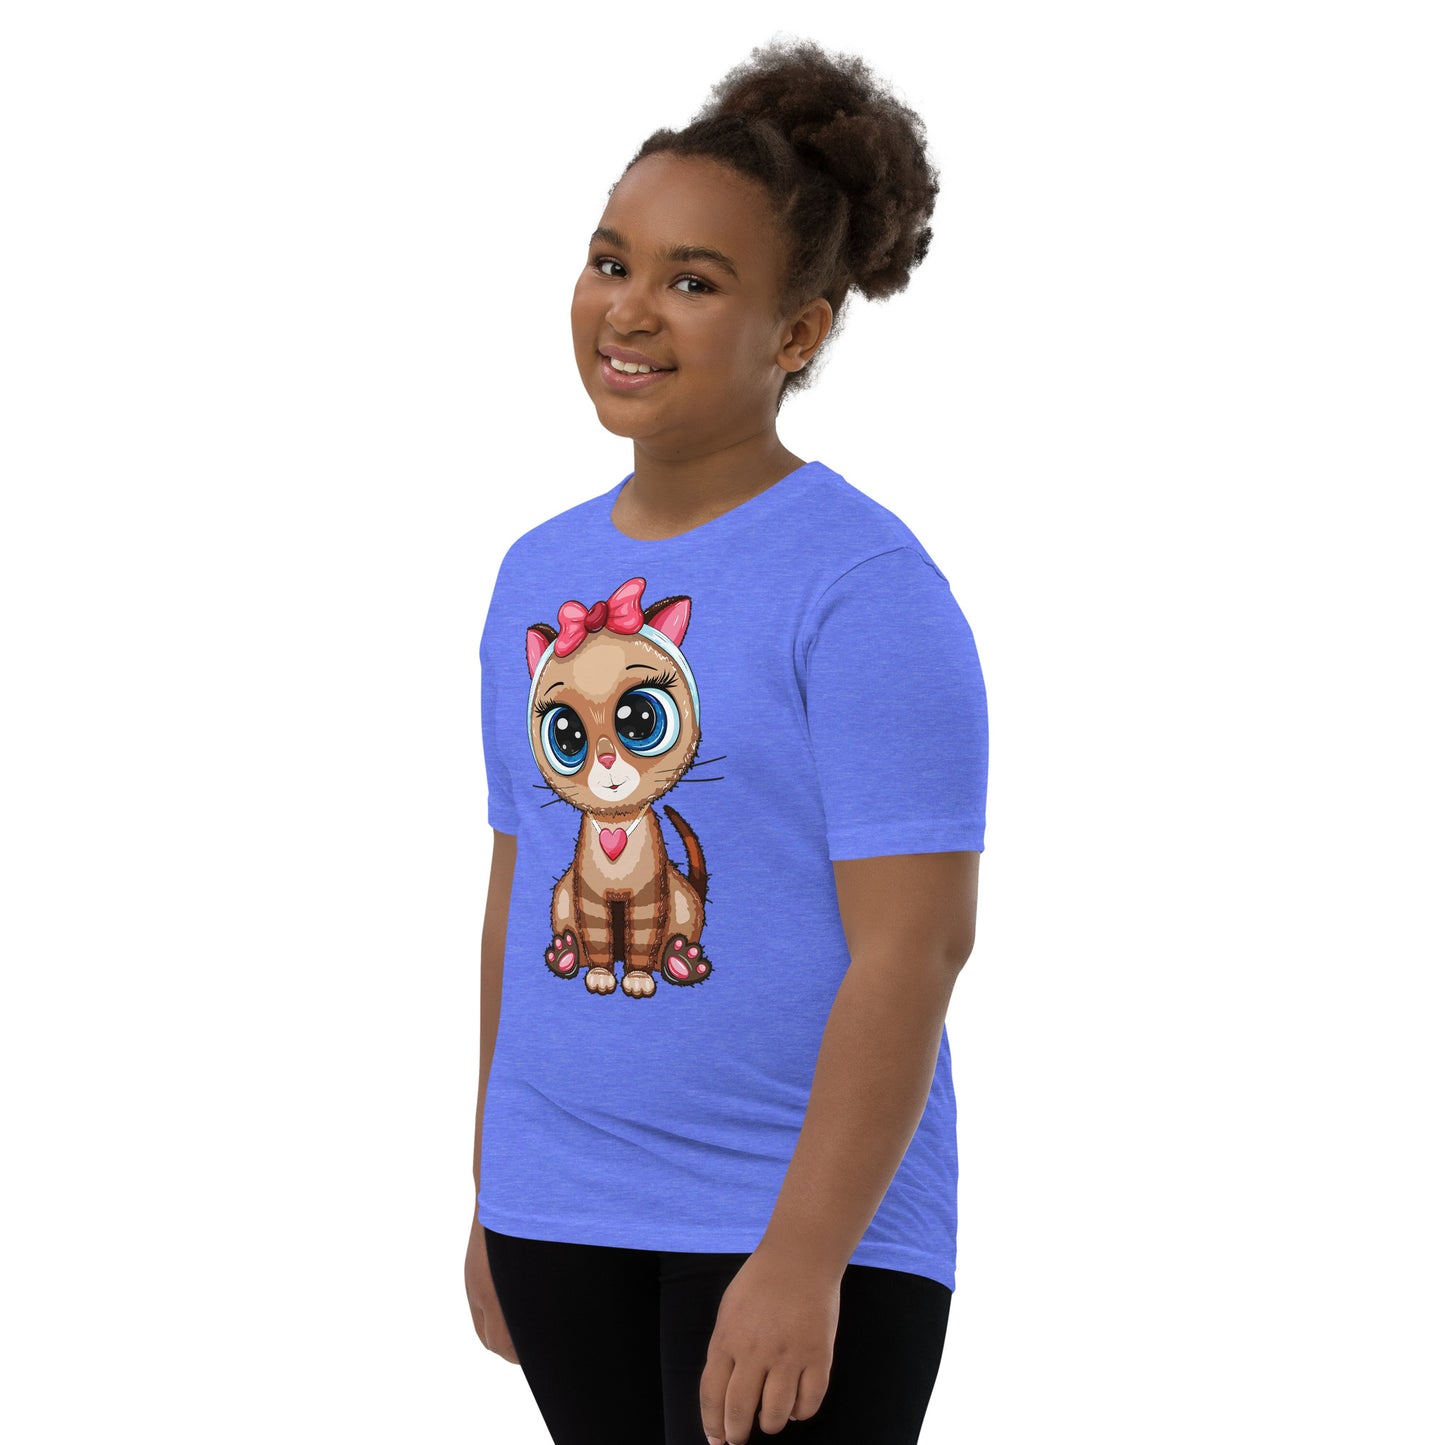 Cute Baby Cat with Big Eyes T-shirt, No. 0273